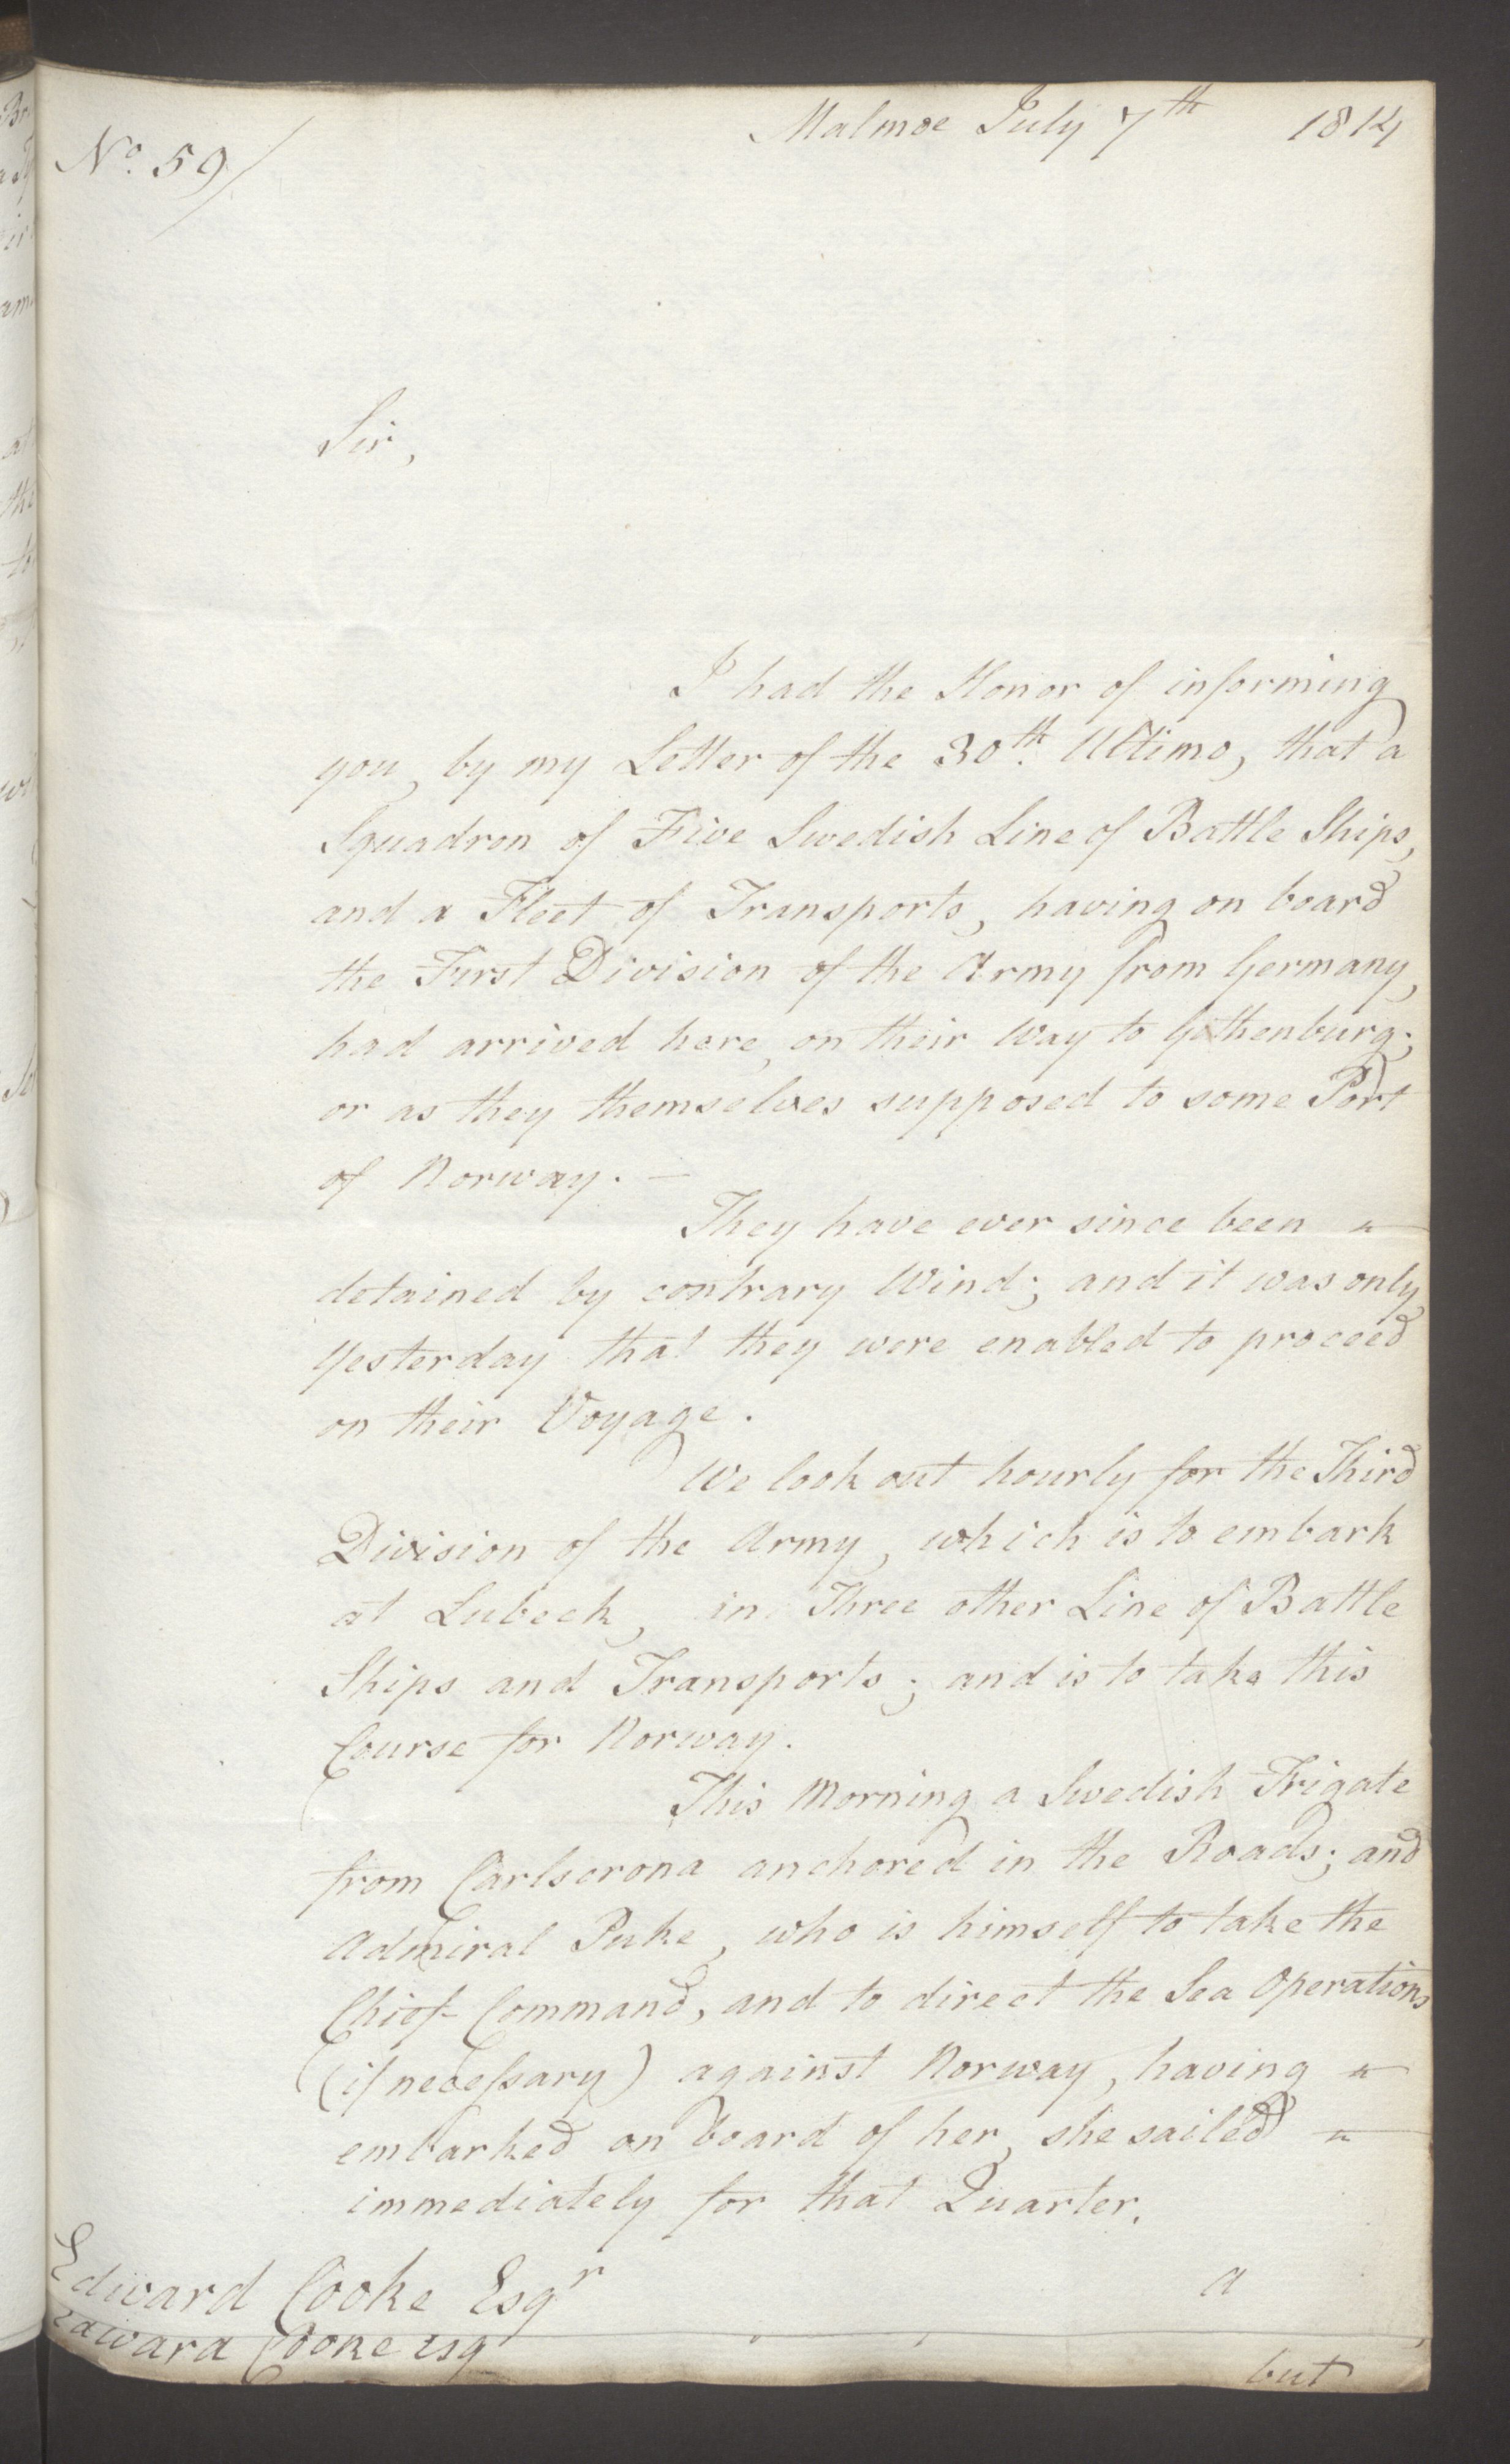 Foreign Office*, UKA/-/FO 38/16: Sir C. Gordon. Reports from Malmö, Jonkoping, and Helsingborg, 1814, p. 71